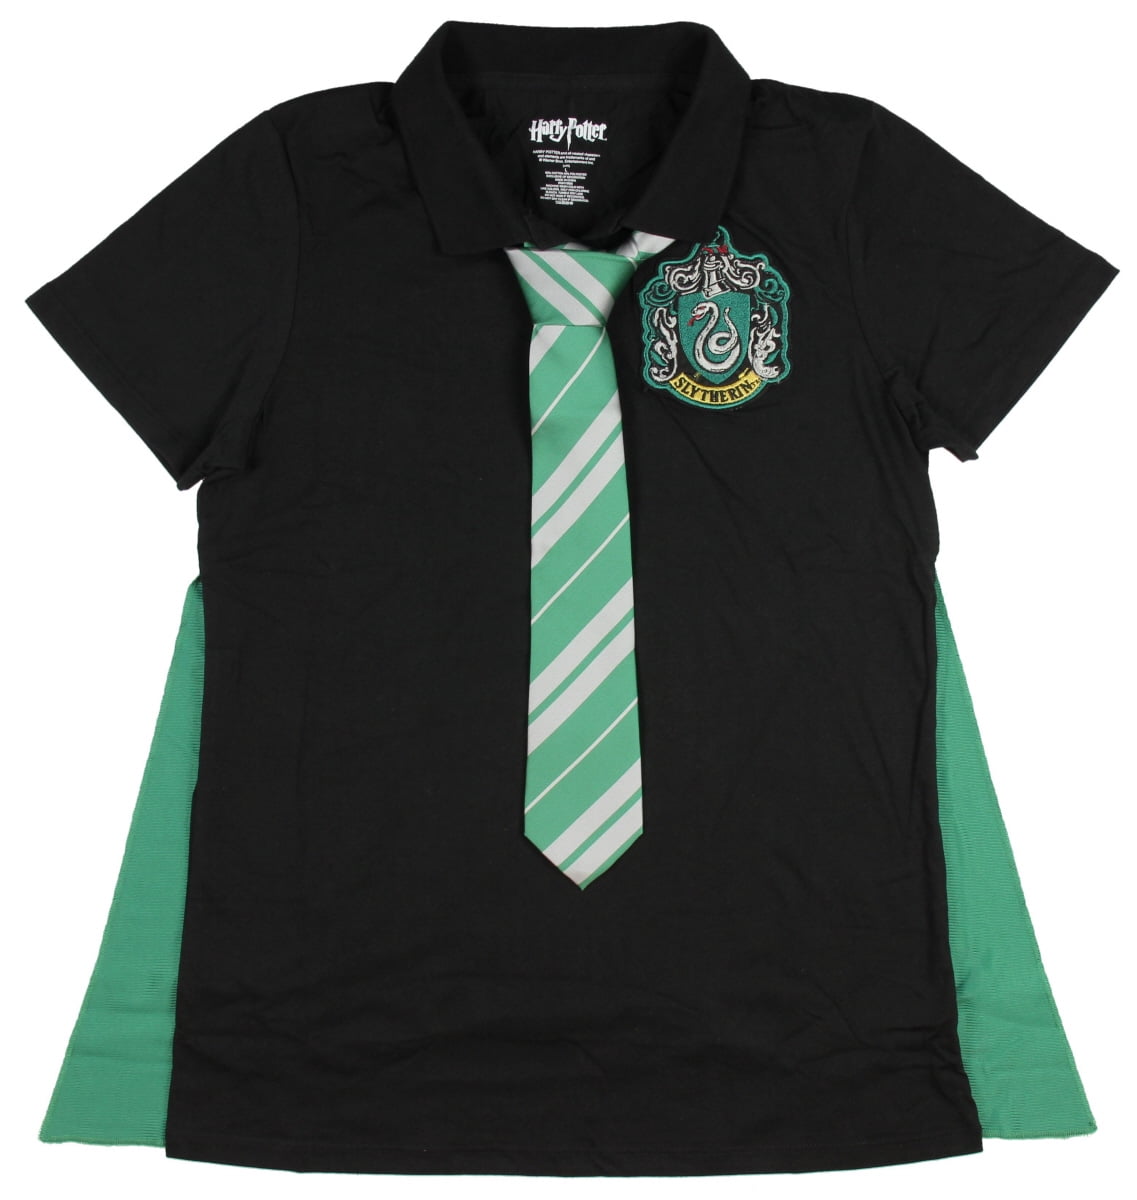 Harry Potter Juniors Slytherin Caped Polo Shirt With Tie